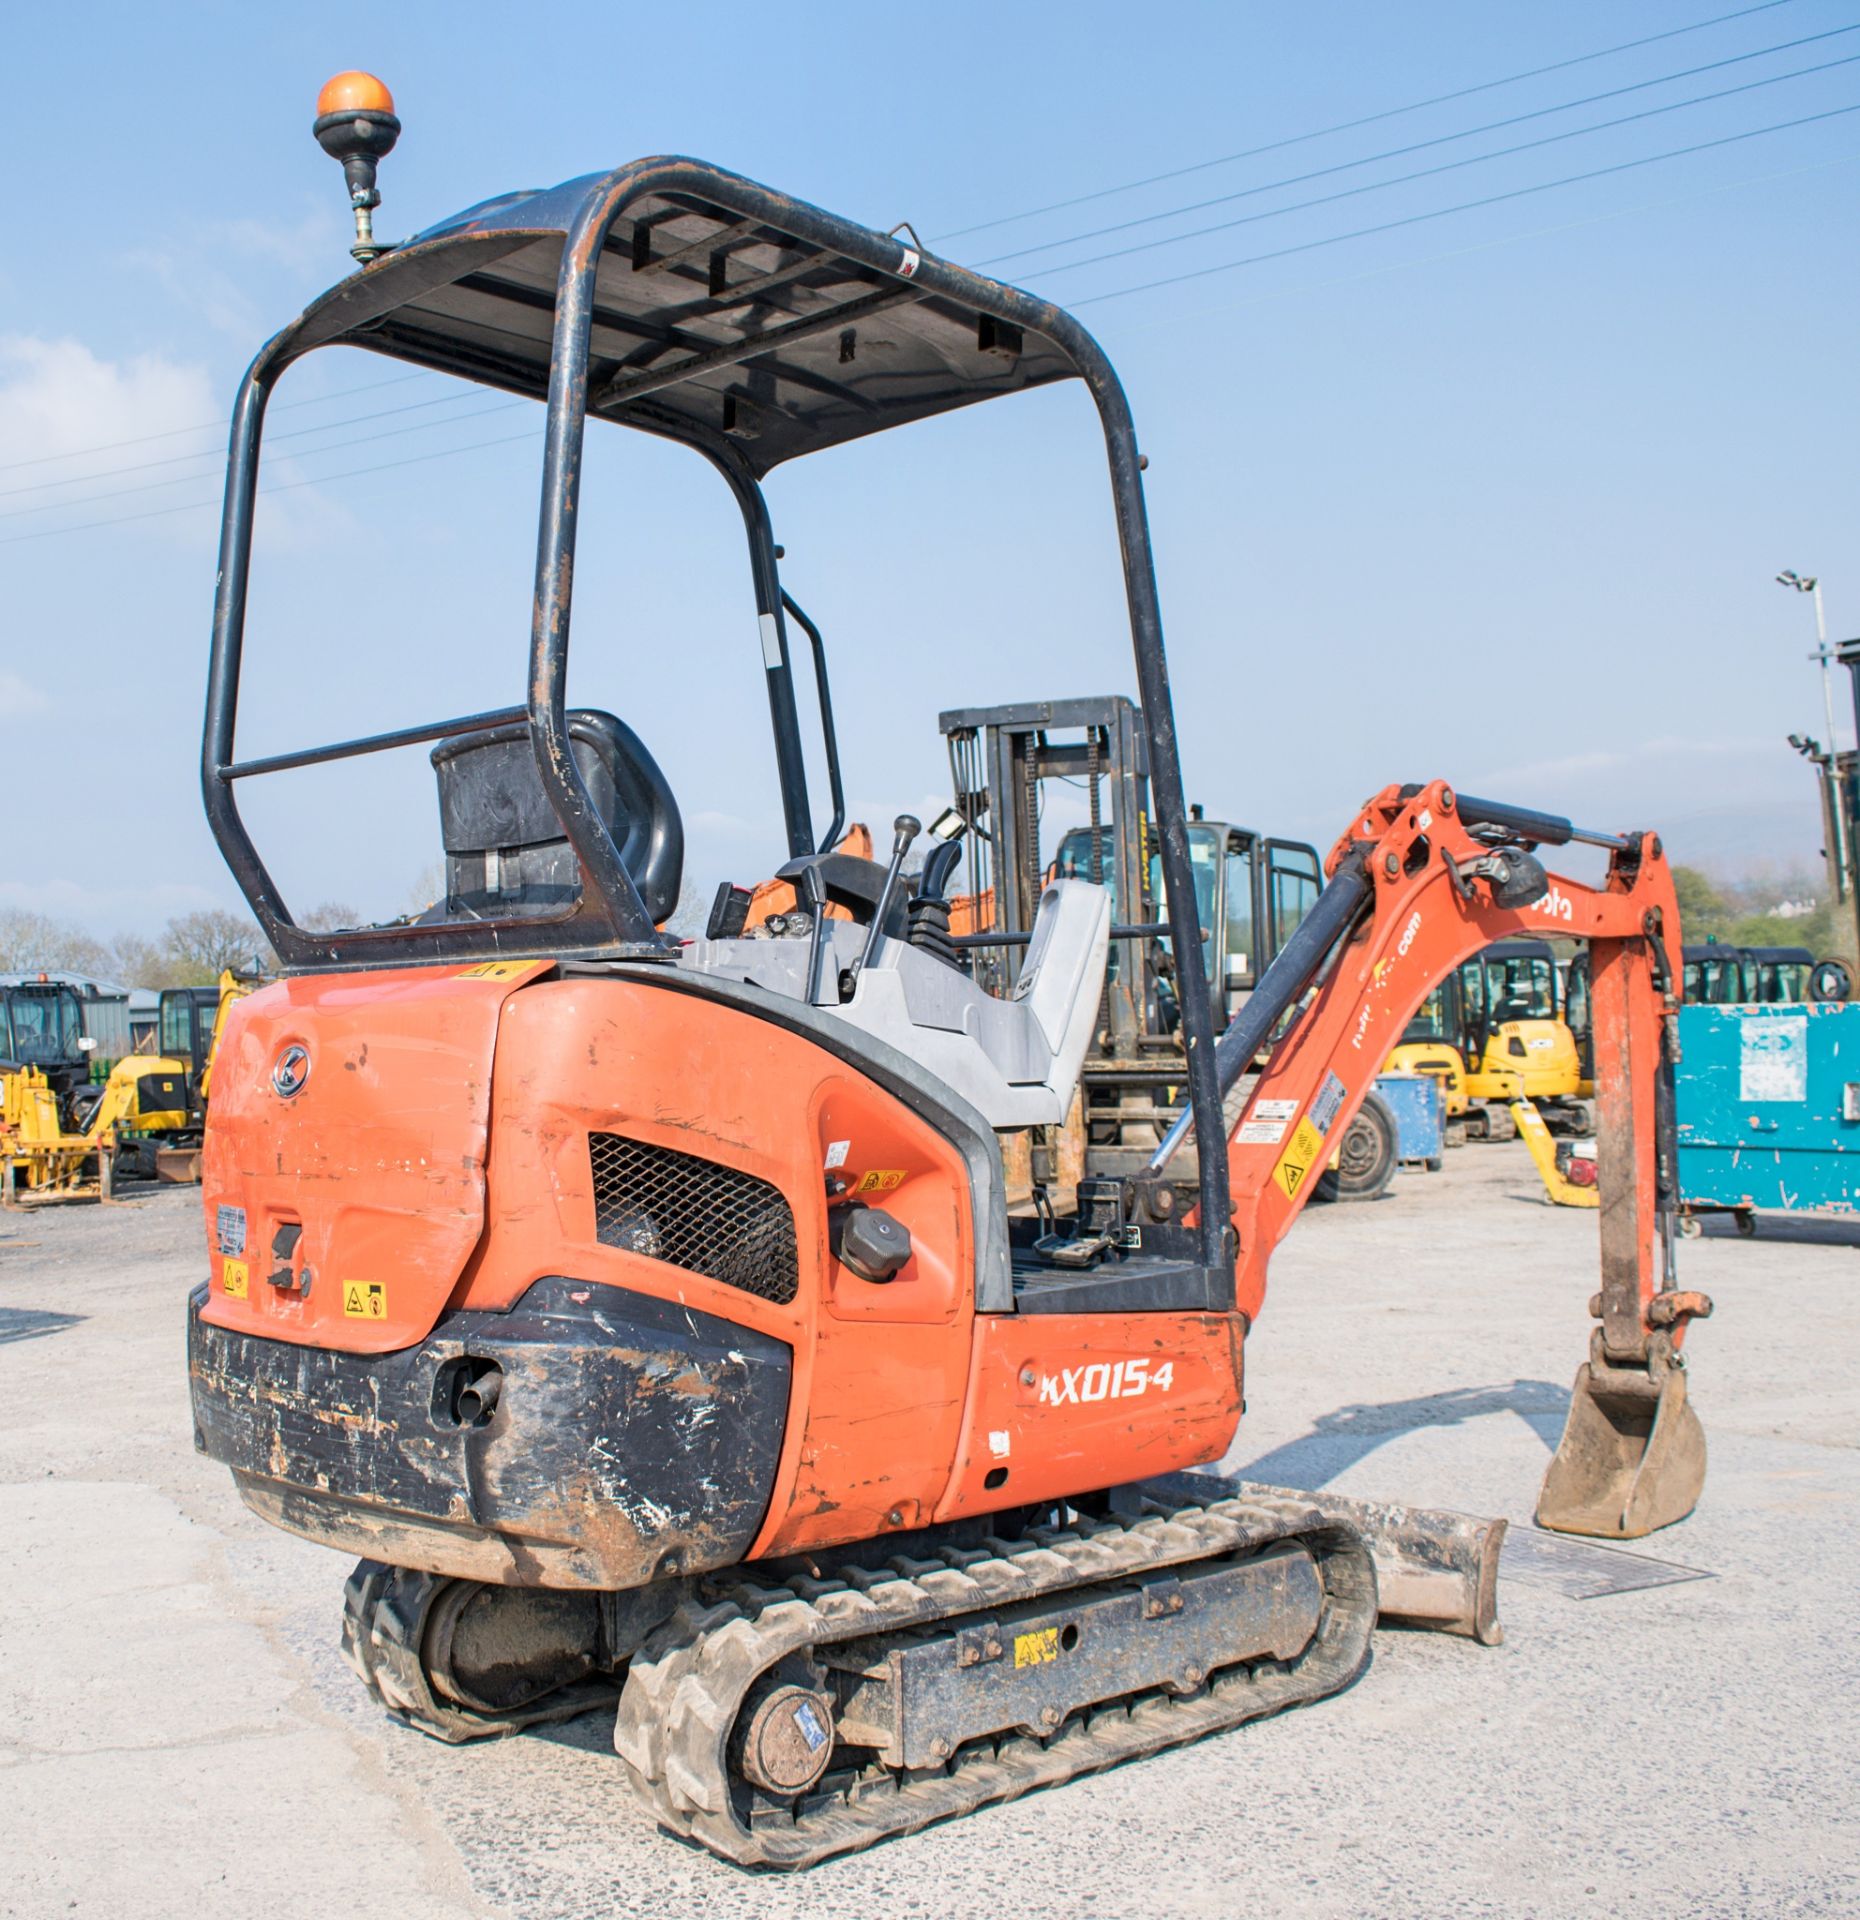 Kubota KX015.4 1.5 tonne rubber tracked excavator Year: 2011 S/N: 55648 Recorded Hours: 2722 - Image 4 of 12